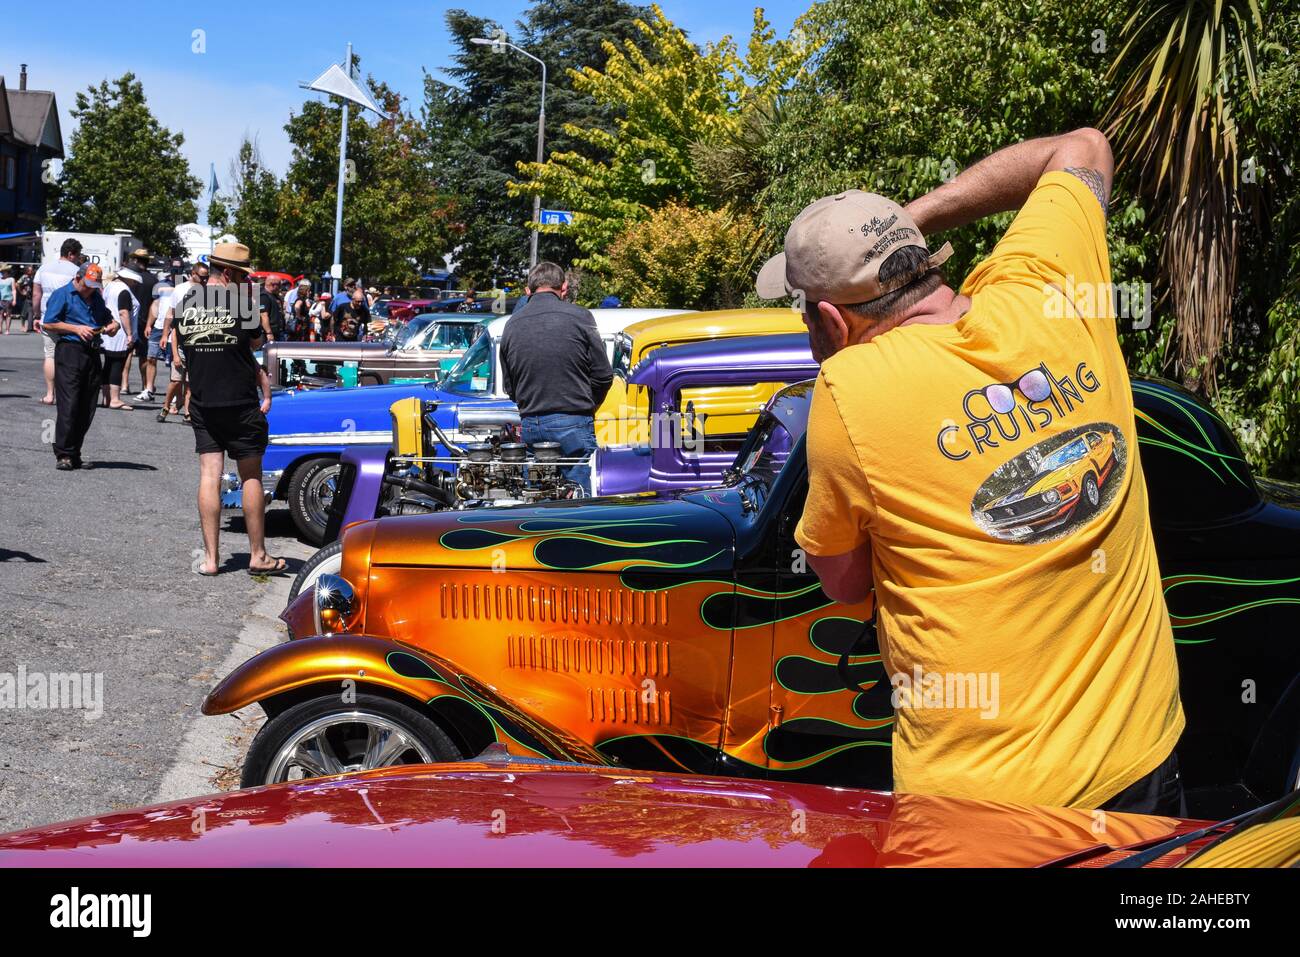 Methven, New Zealand. 28th Dec 2019. A sunny day brings out the petrol heads for a gathering of hot rods and other custom cars on the southern island of New Zealand. Stock Photo